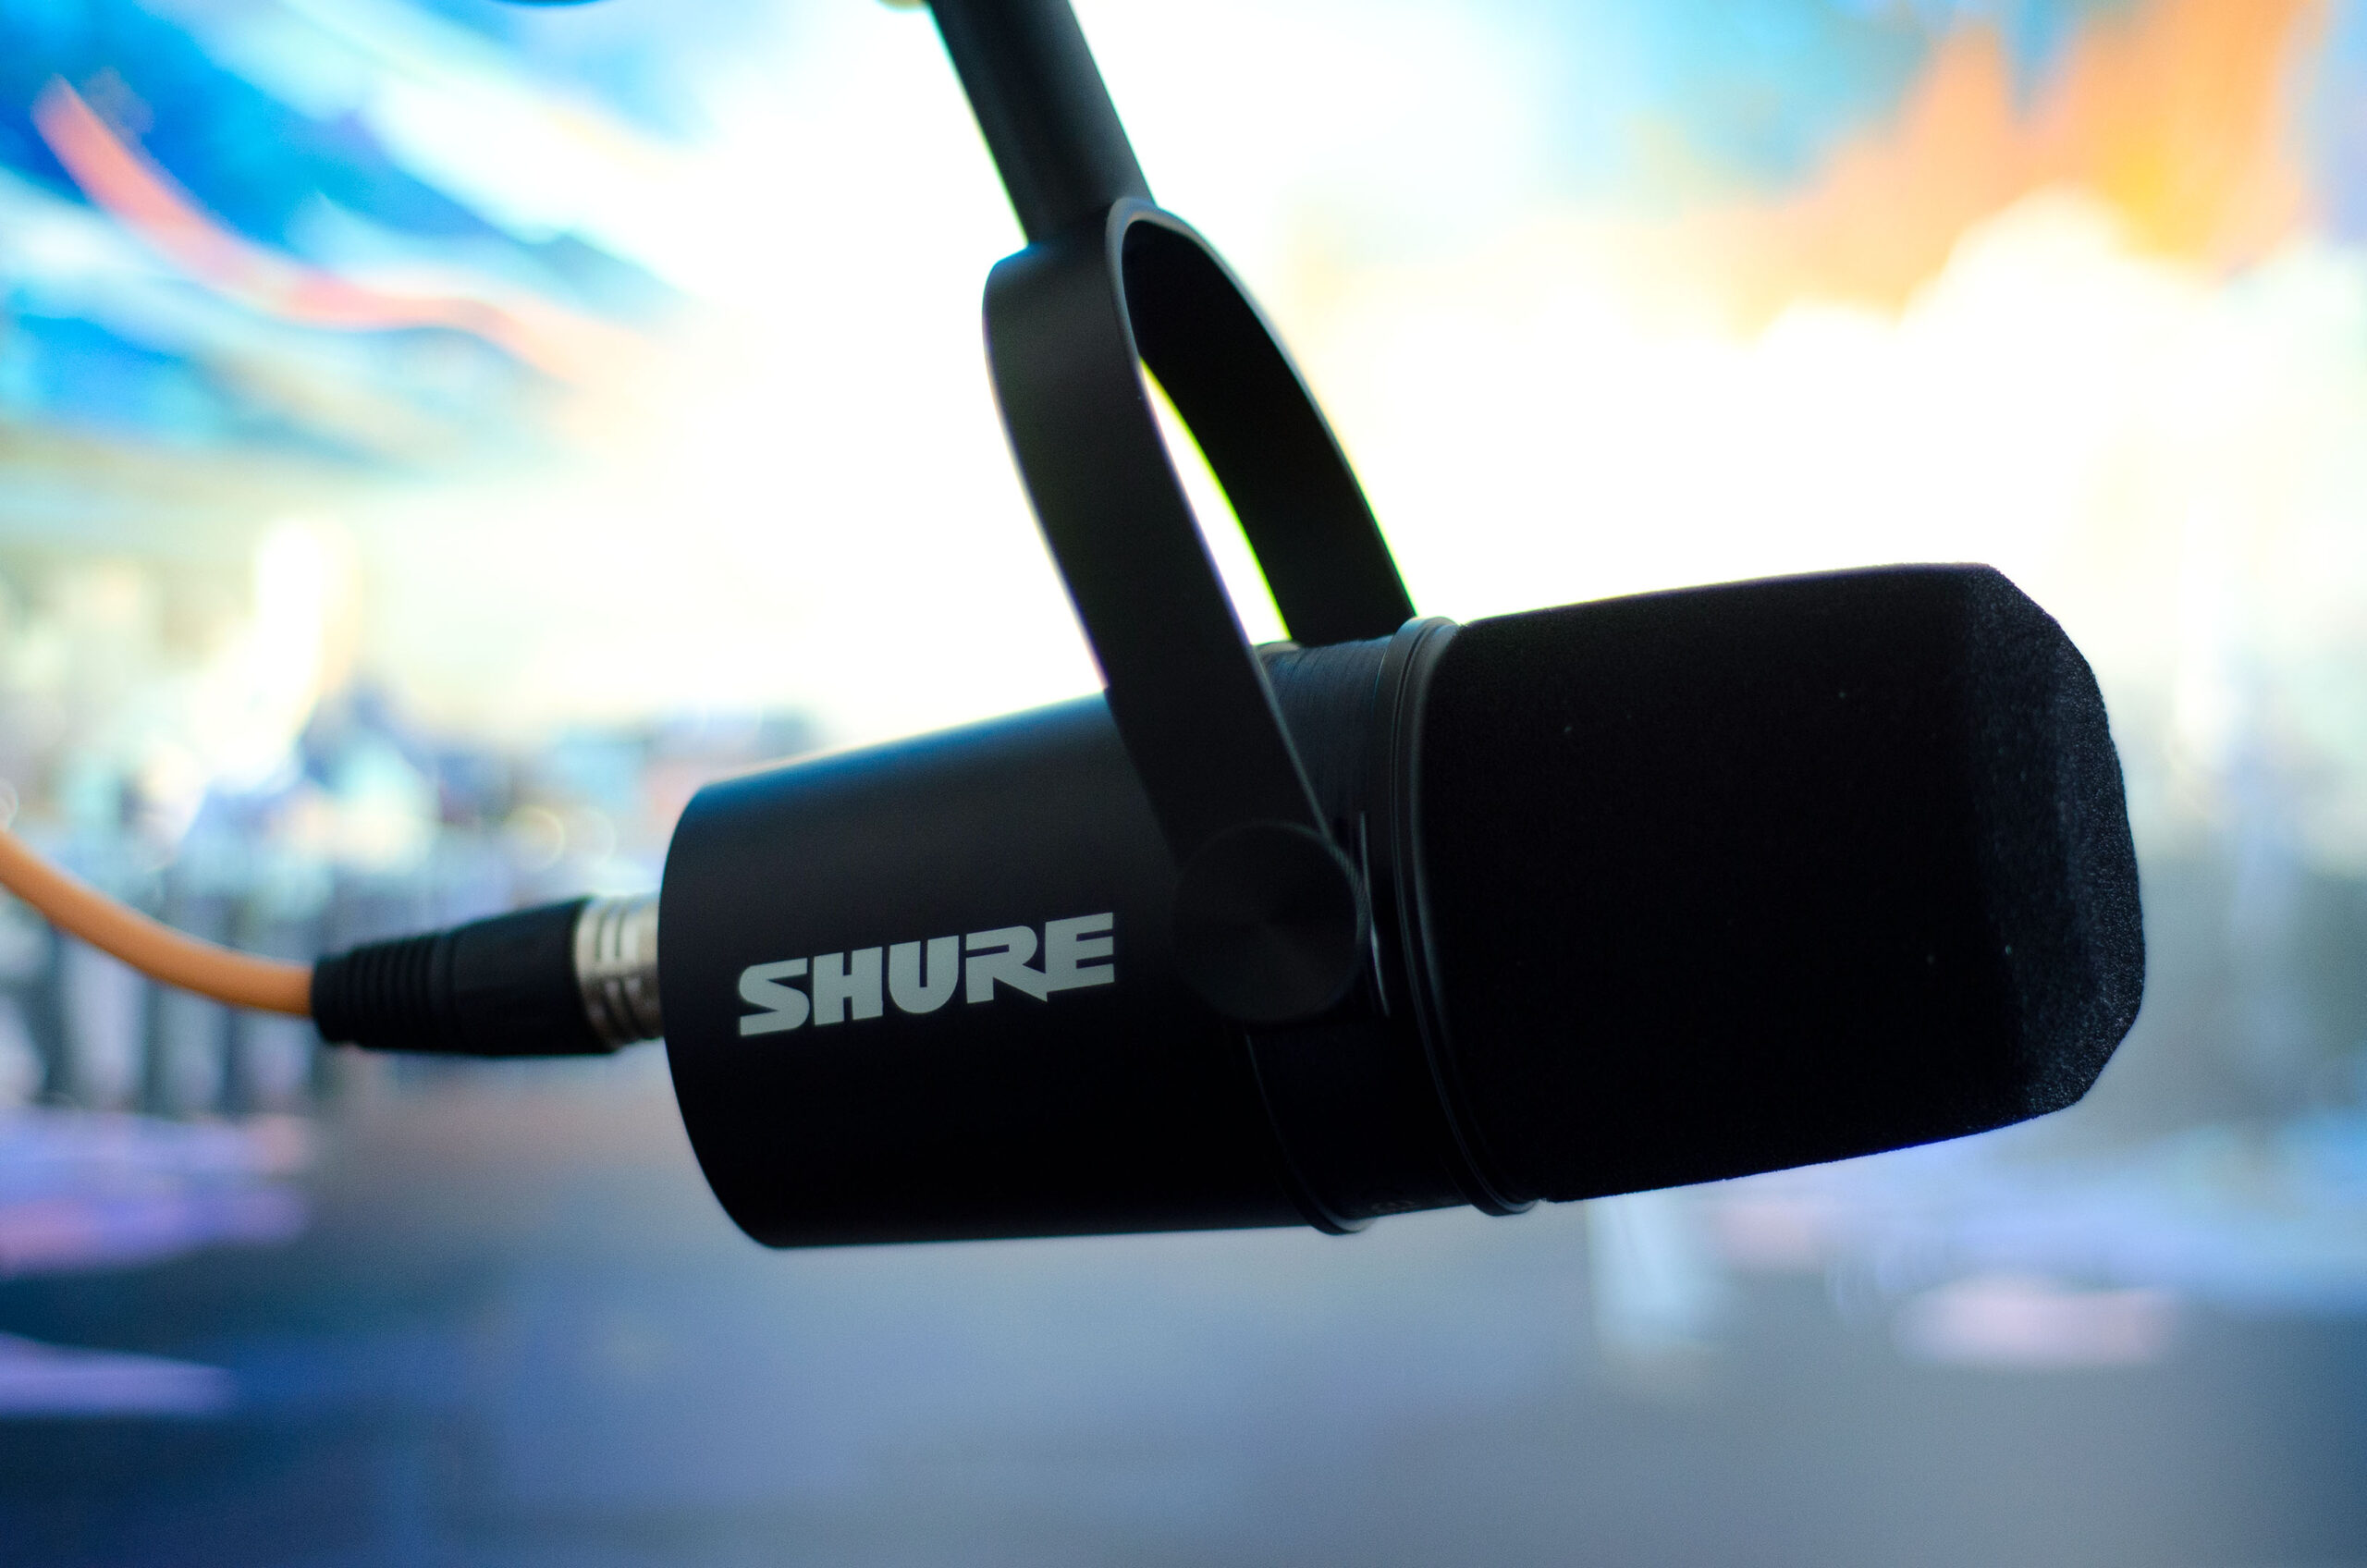 Shure's MV7X is an affordable streaming mic with unmatched sound